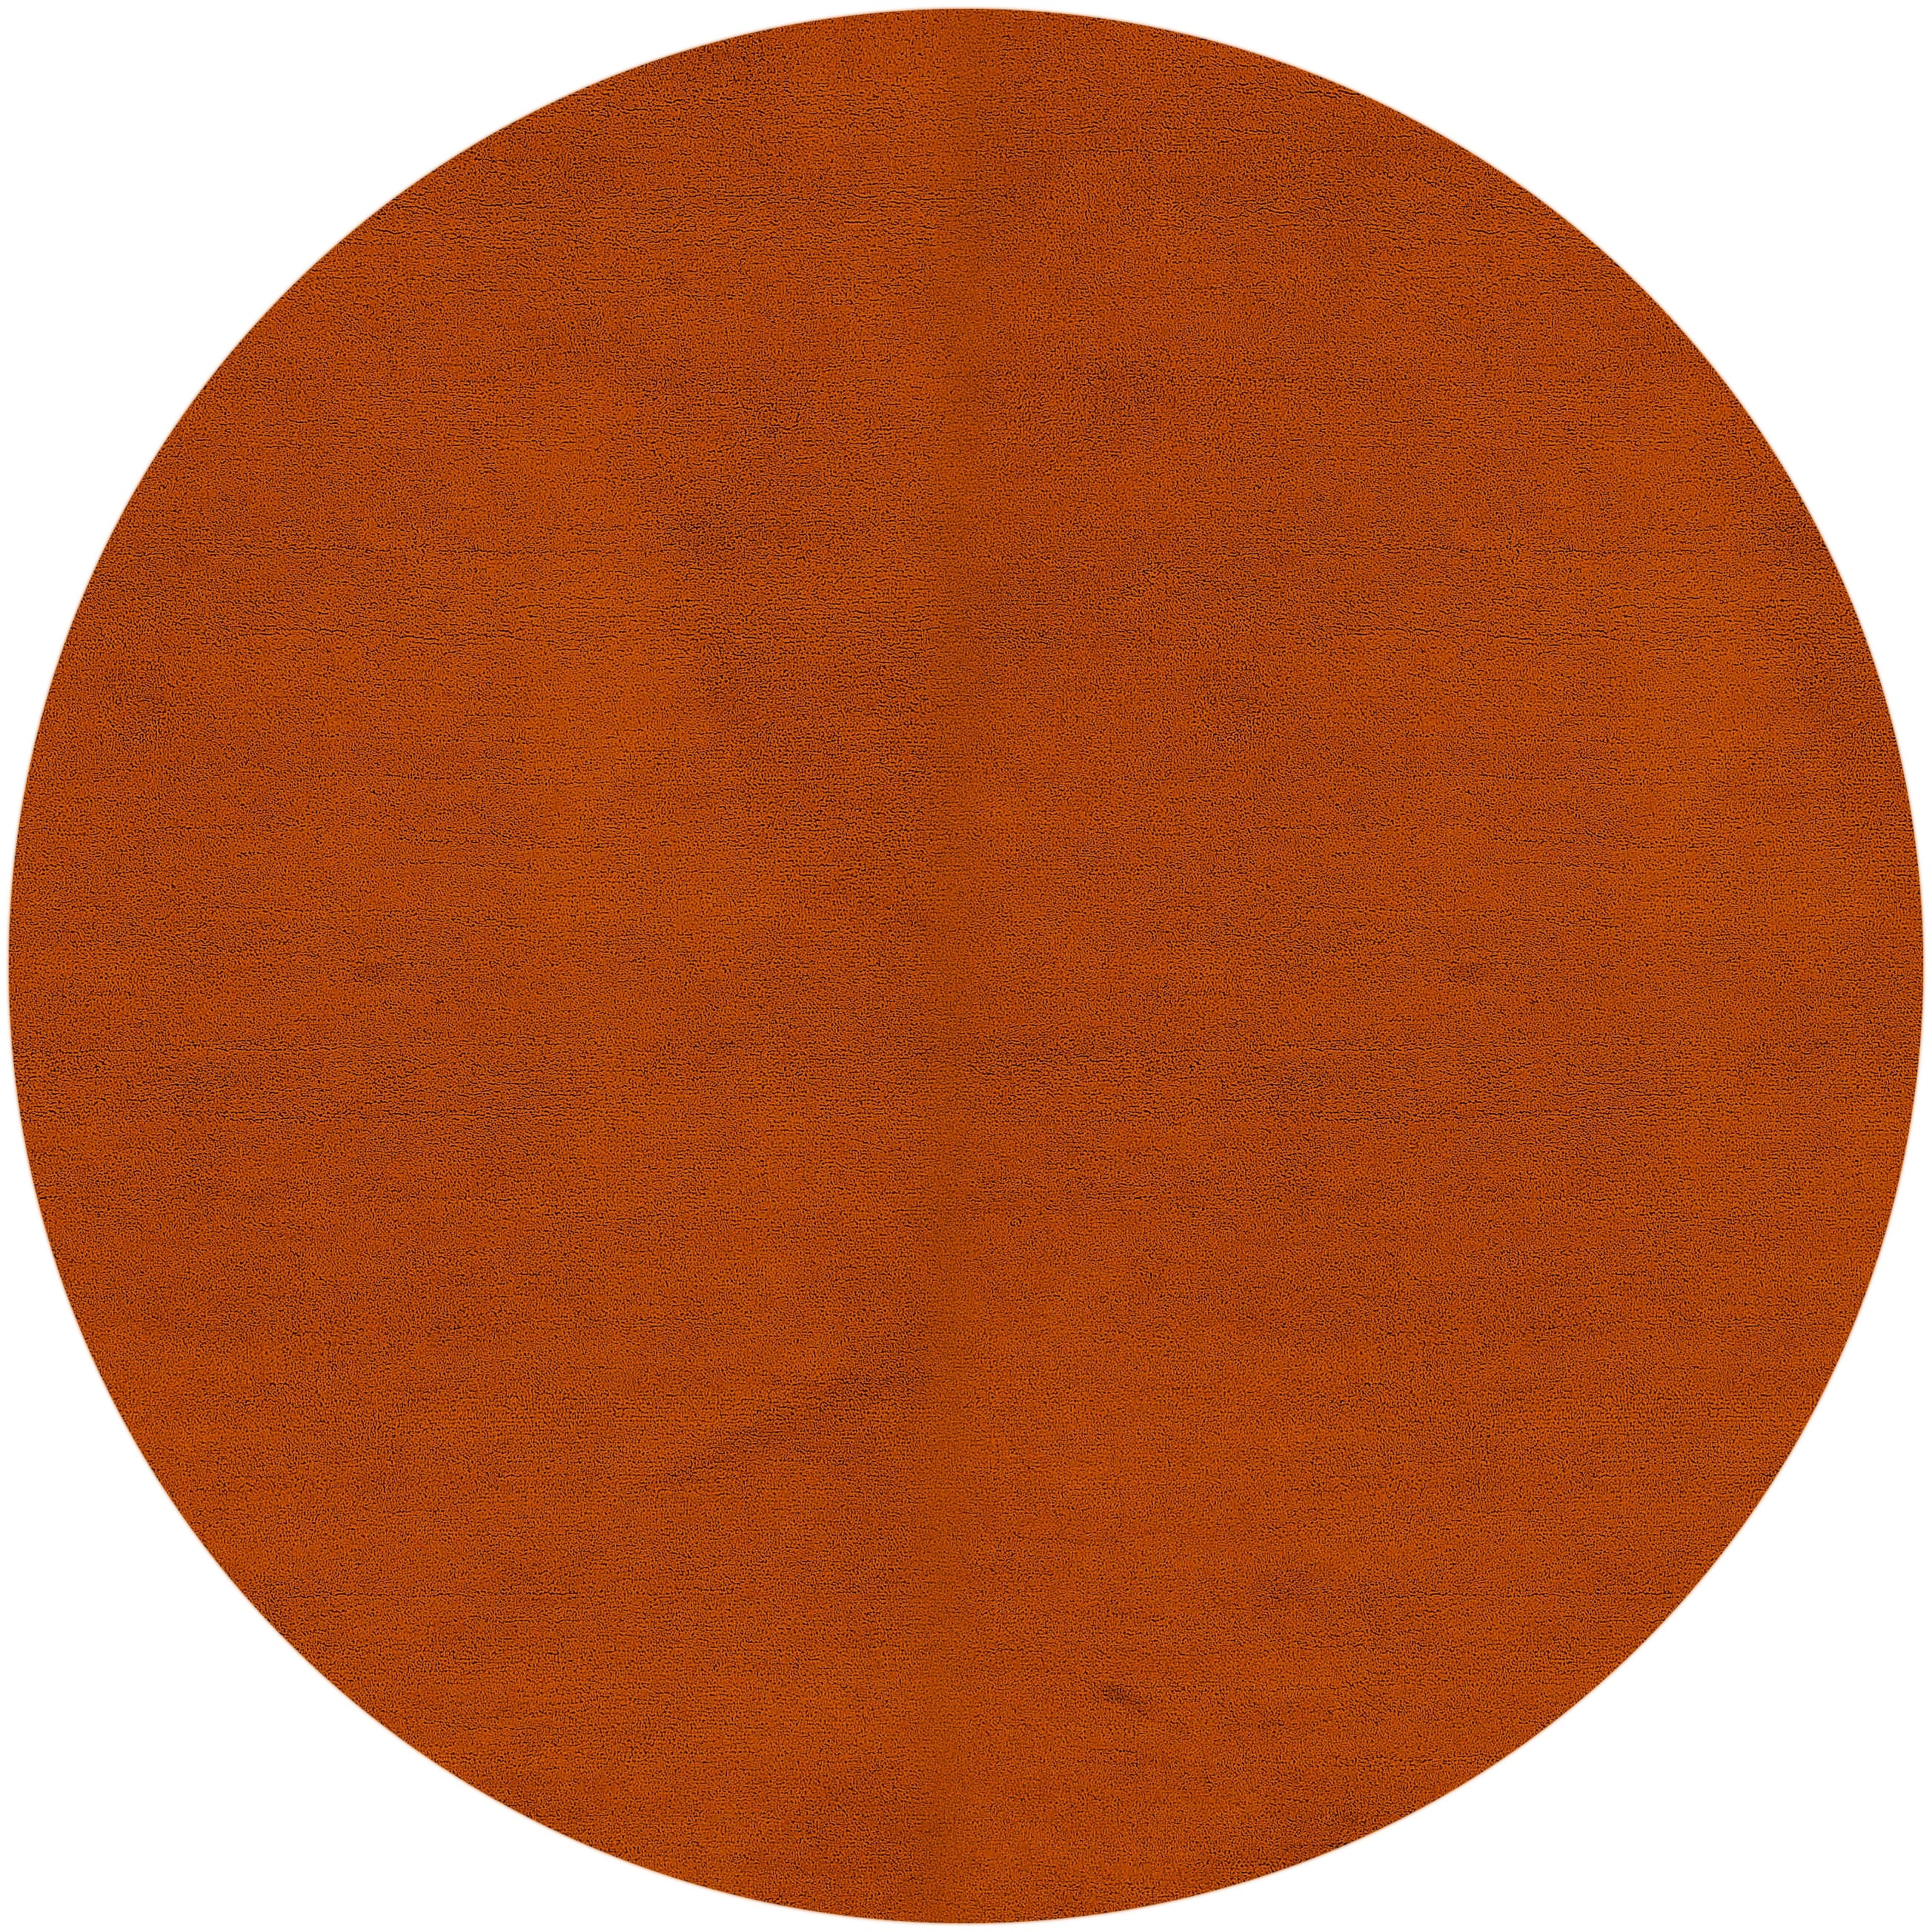 Hand-knotted Long Island Rust Plush Wool Area Rug - 8' Round